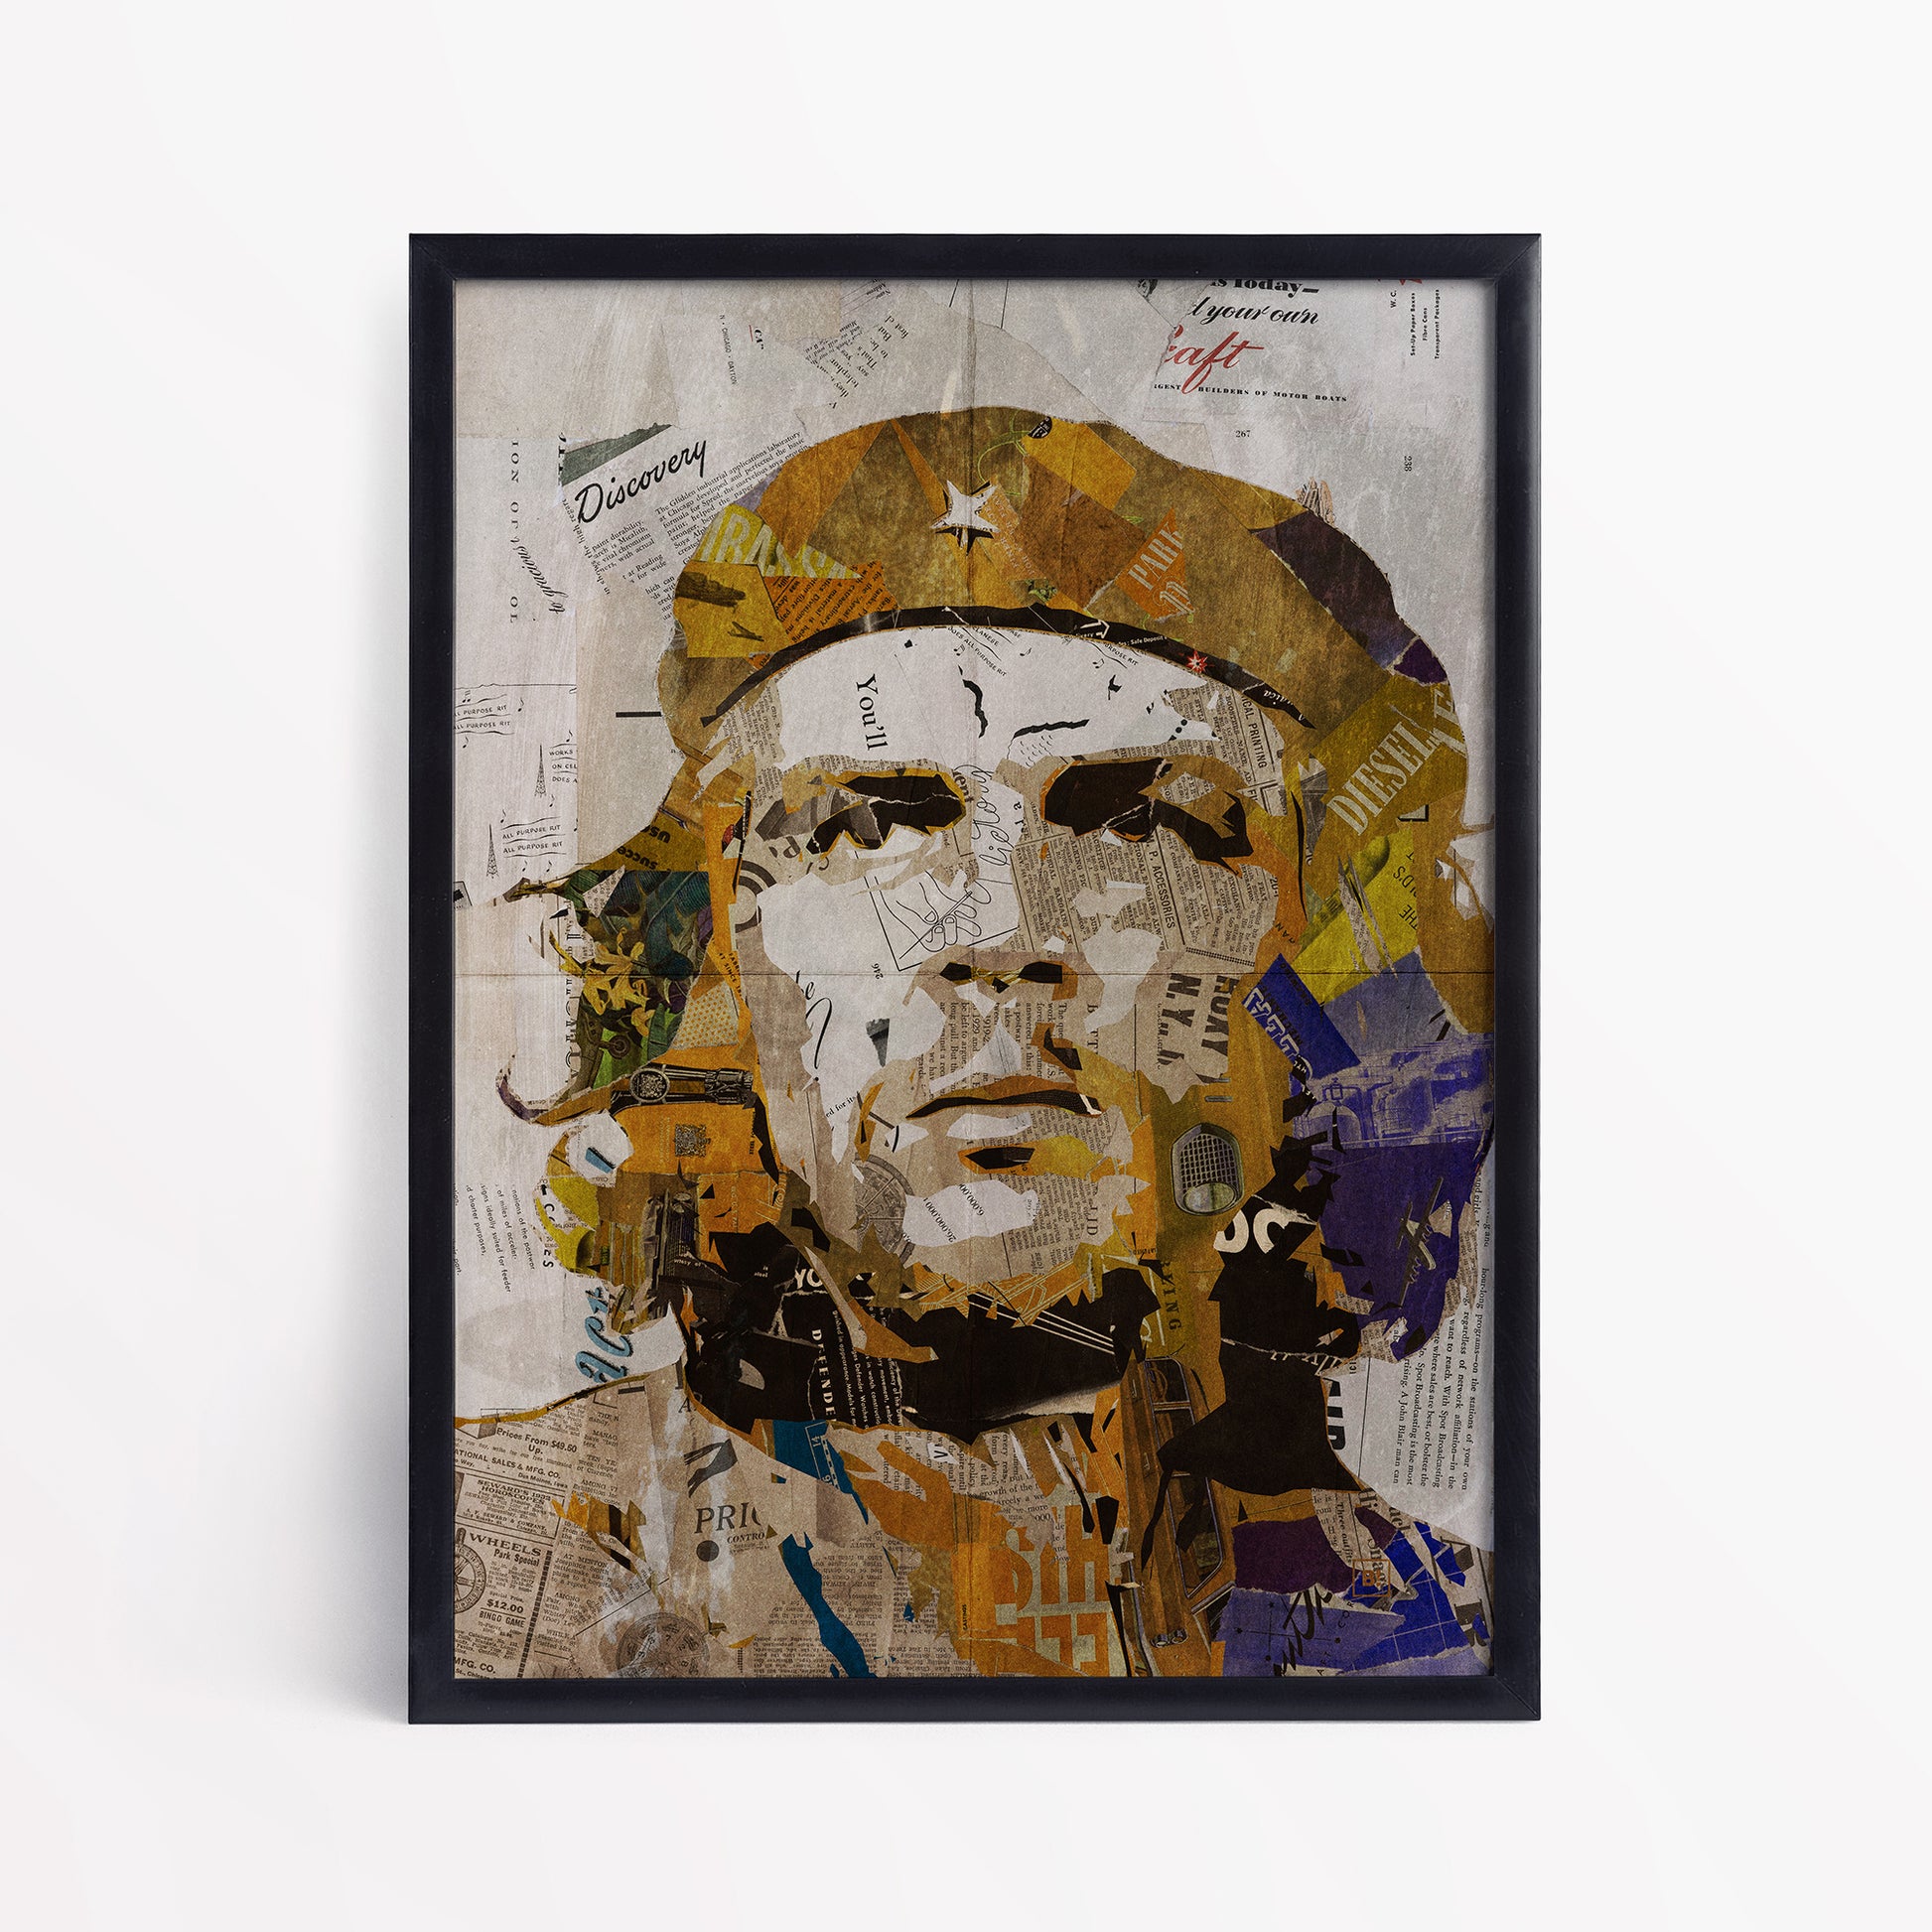 Be inspired by our iconic collage portrait art print of Che Guevara. This artwork has been printed using the giclée process on archival acid-free paper and is presented in a sleek black frame, showcasing its timeless beauty in every detail.